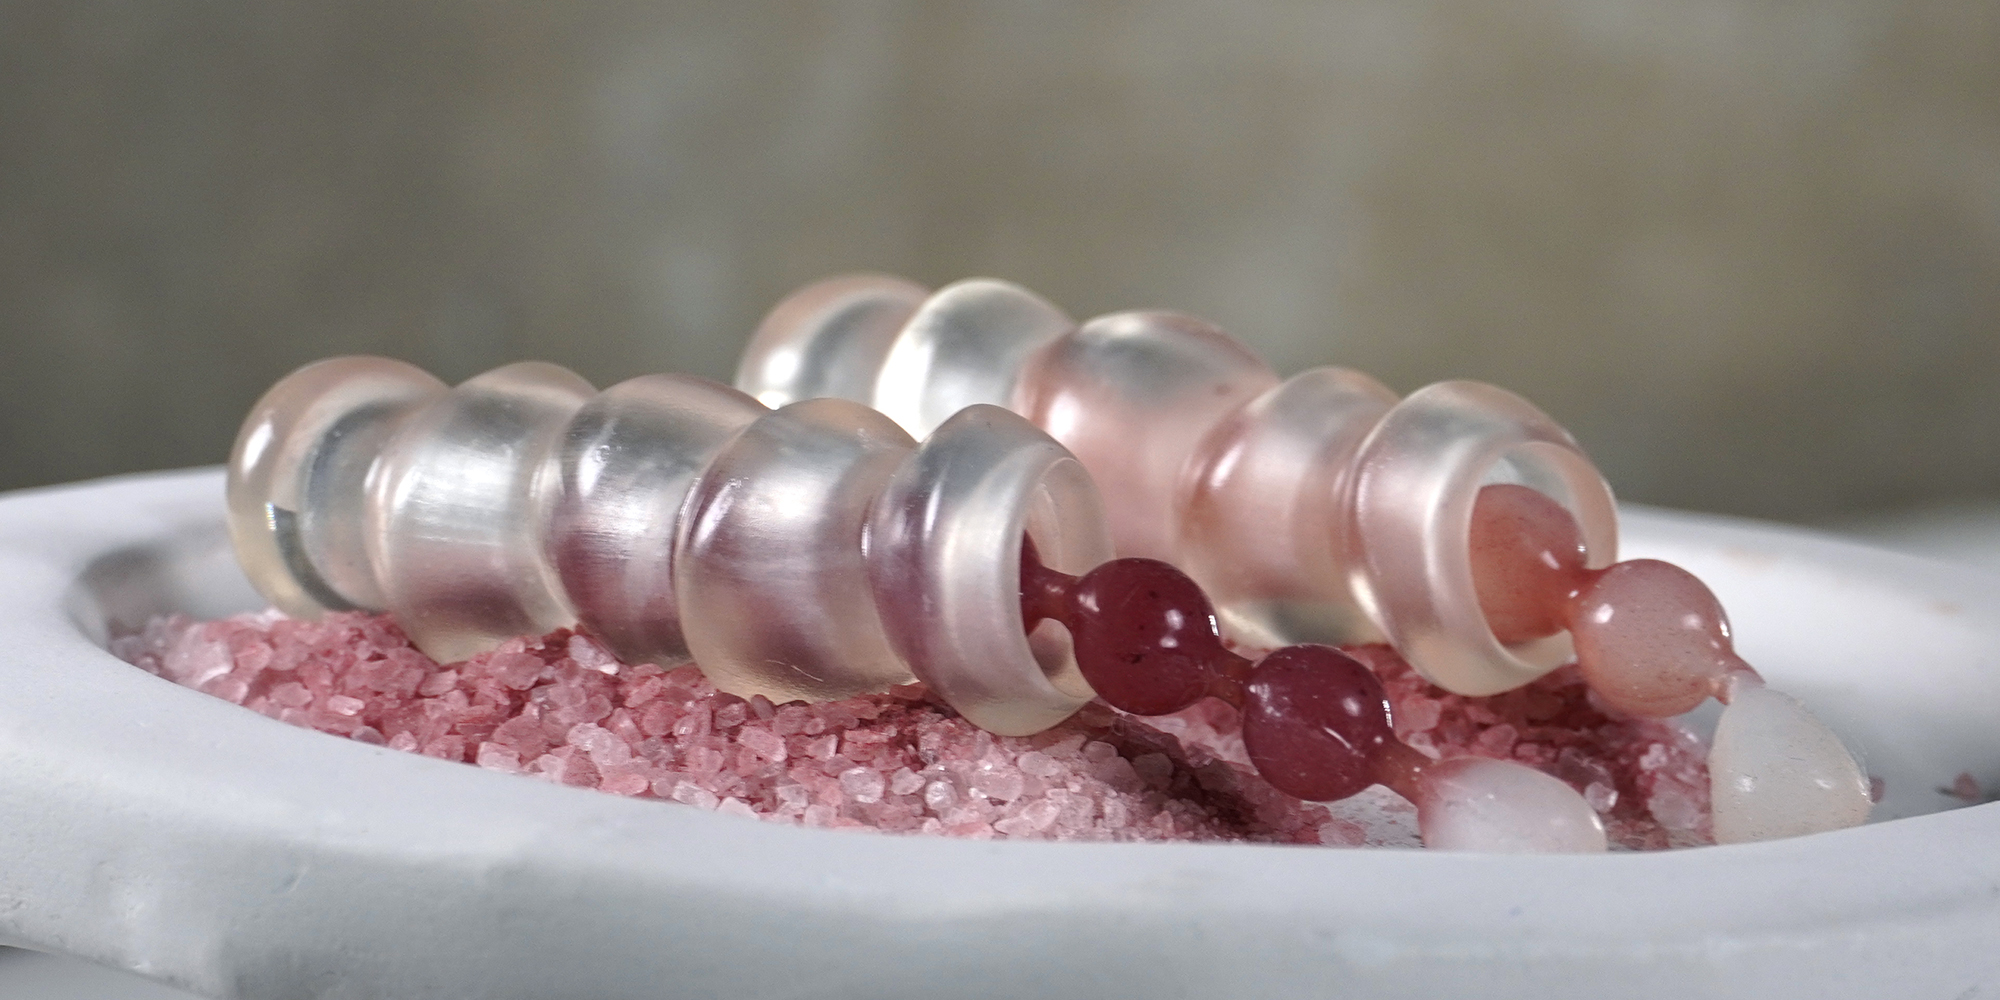 Sheathed pink beads on a bed of pink grain